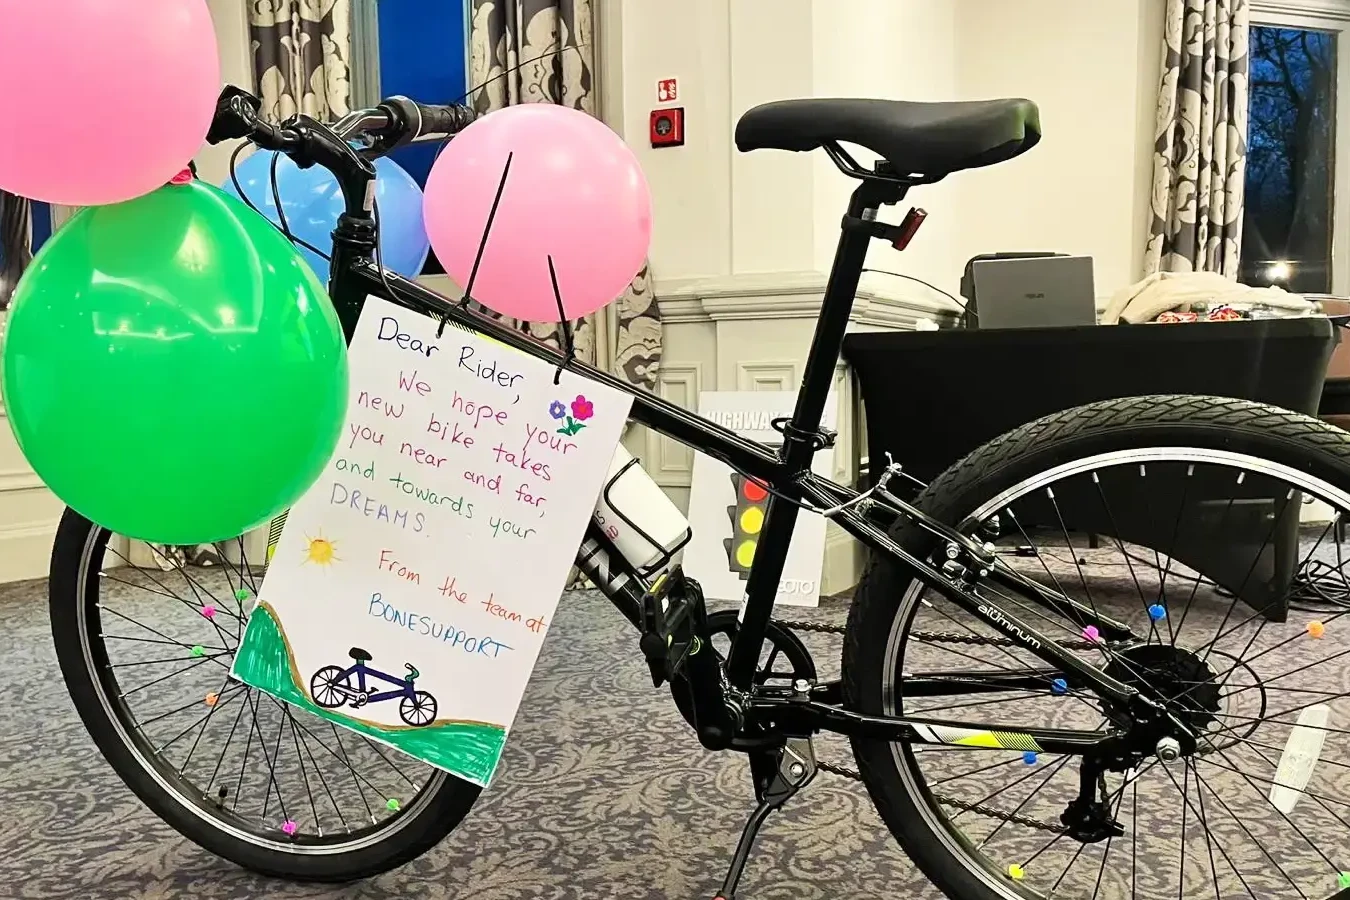 Assembled bike with personalized message after charity bike build team building